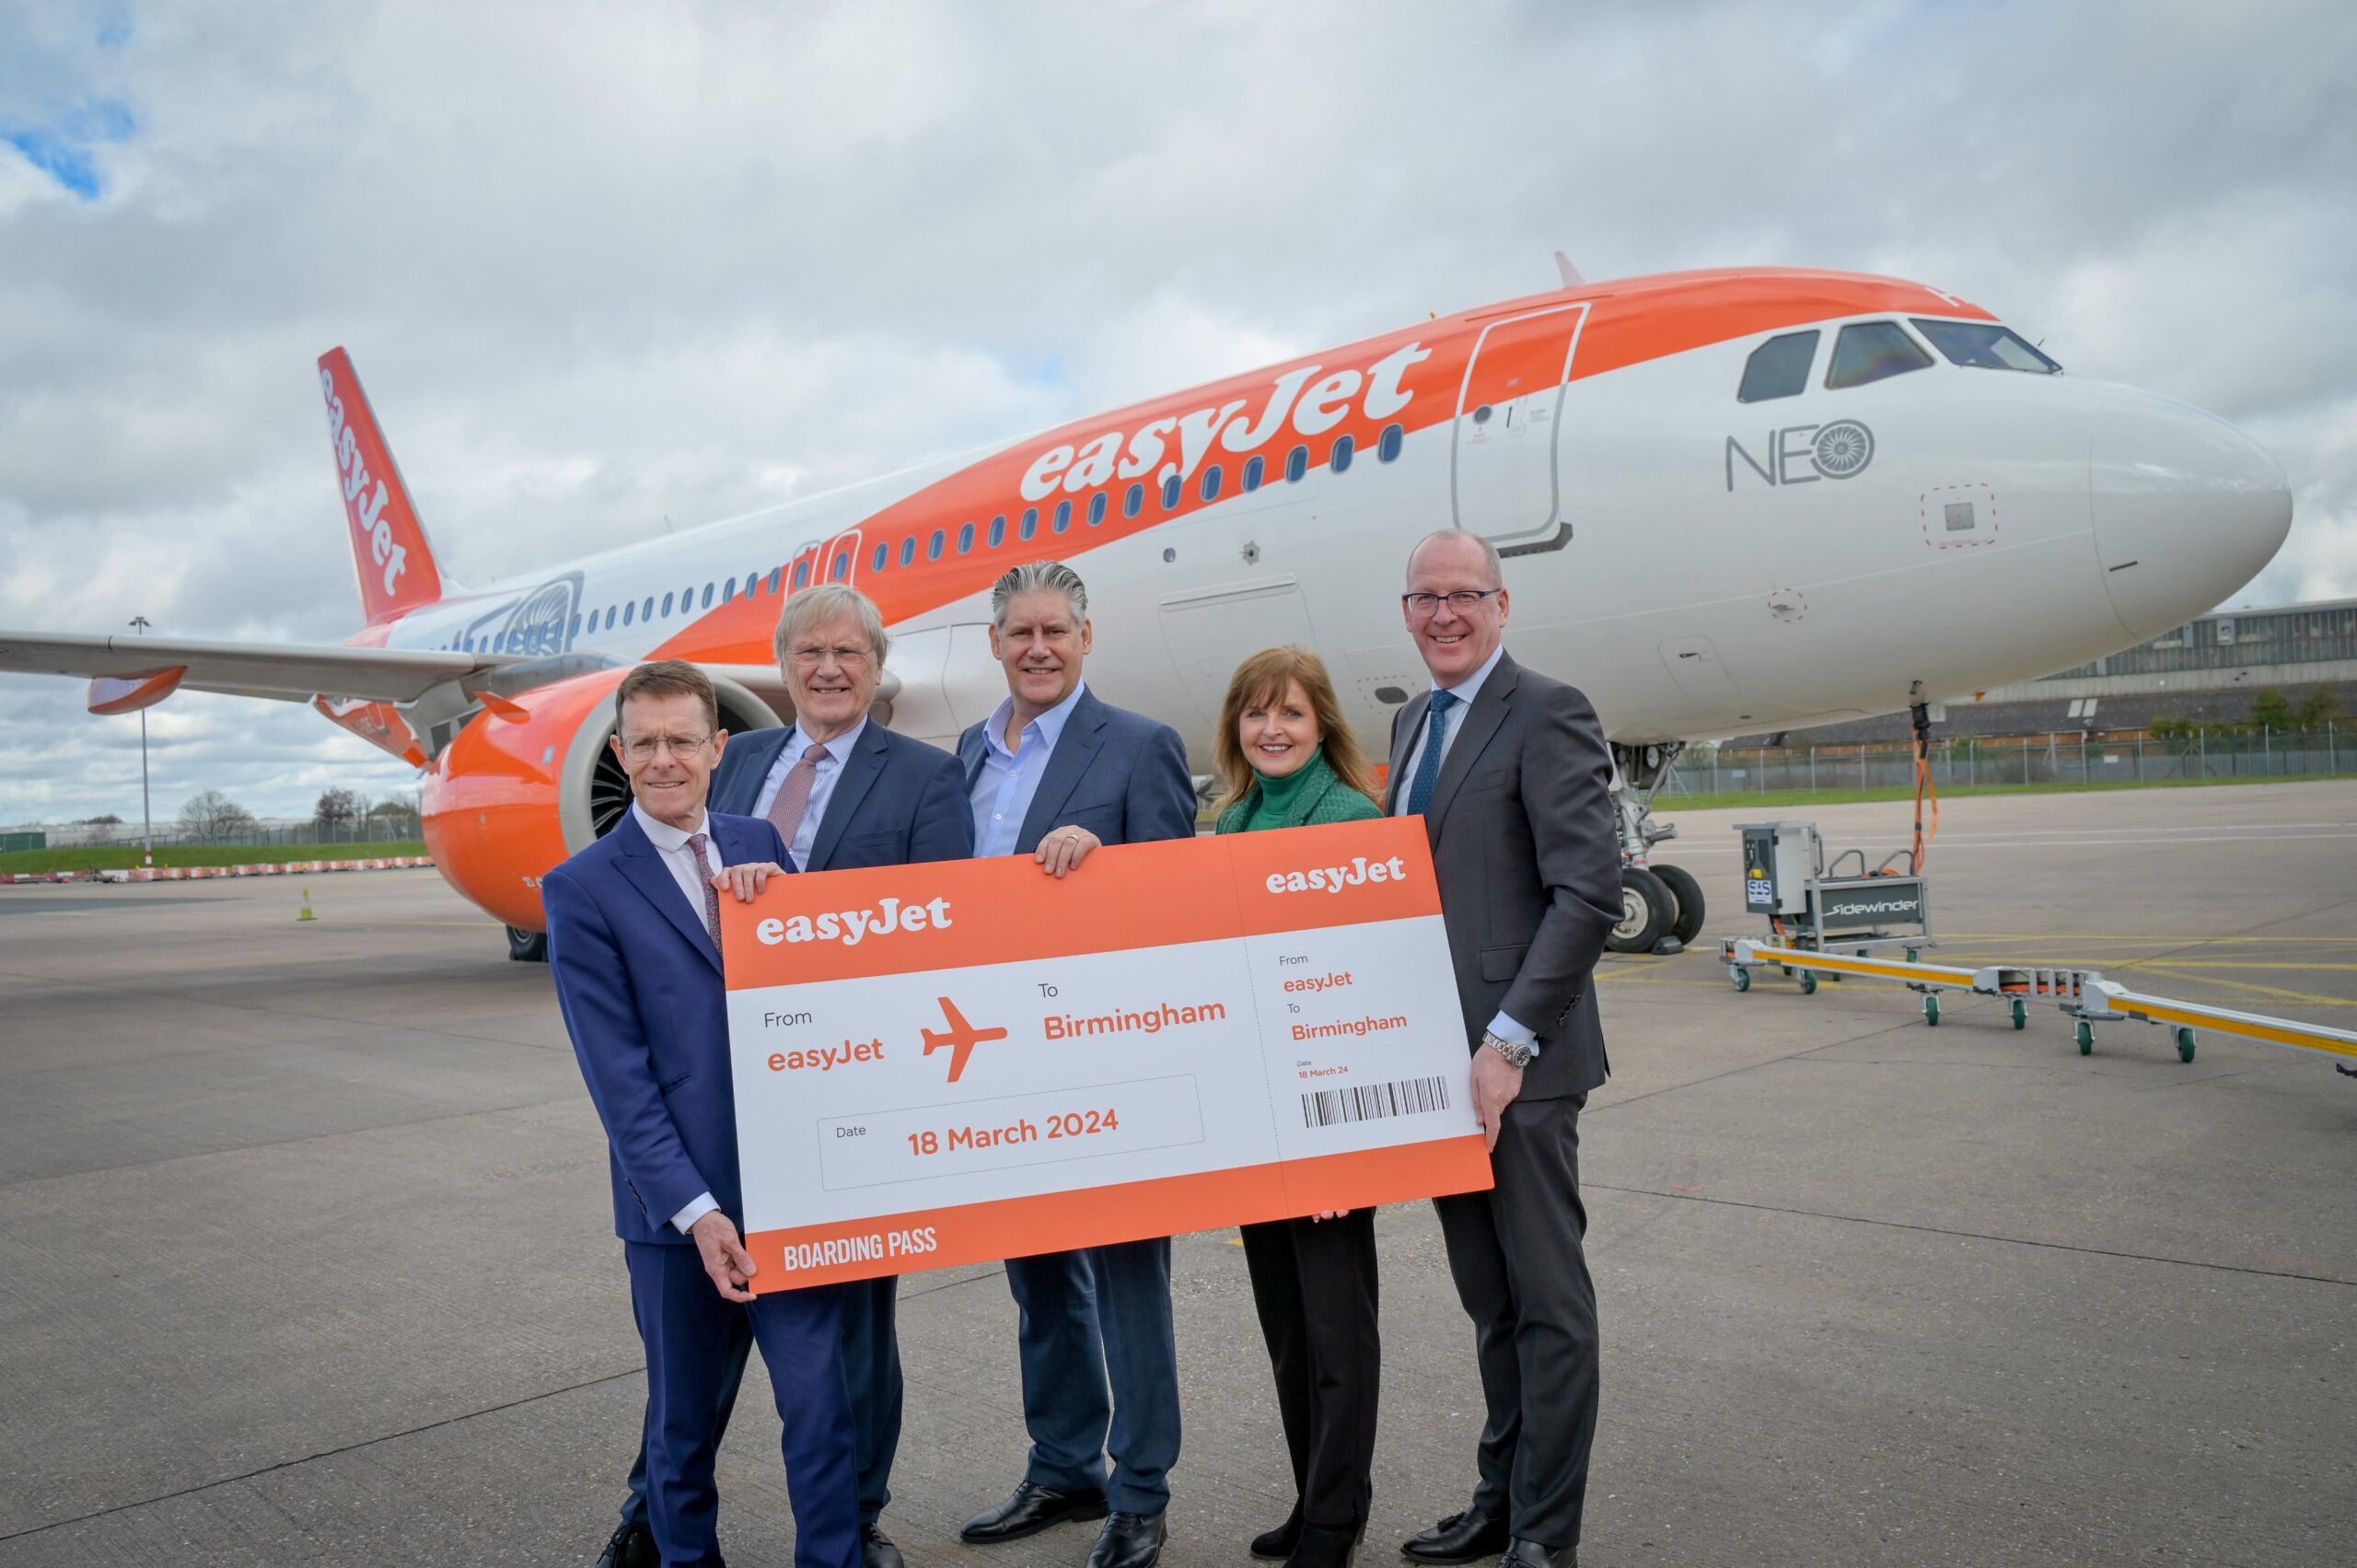 easyJet's new base was inaugurated on 18 March 2024